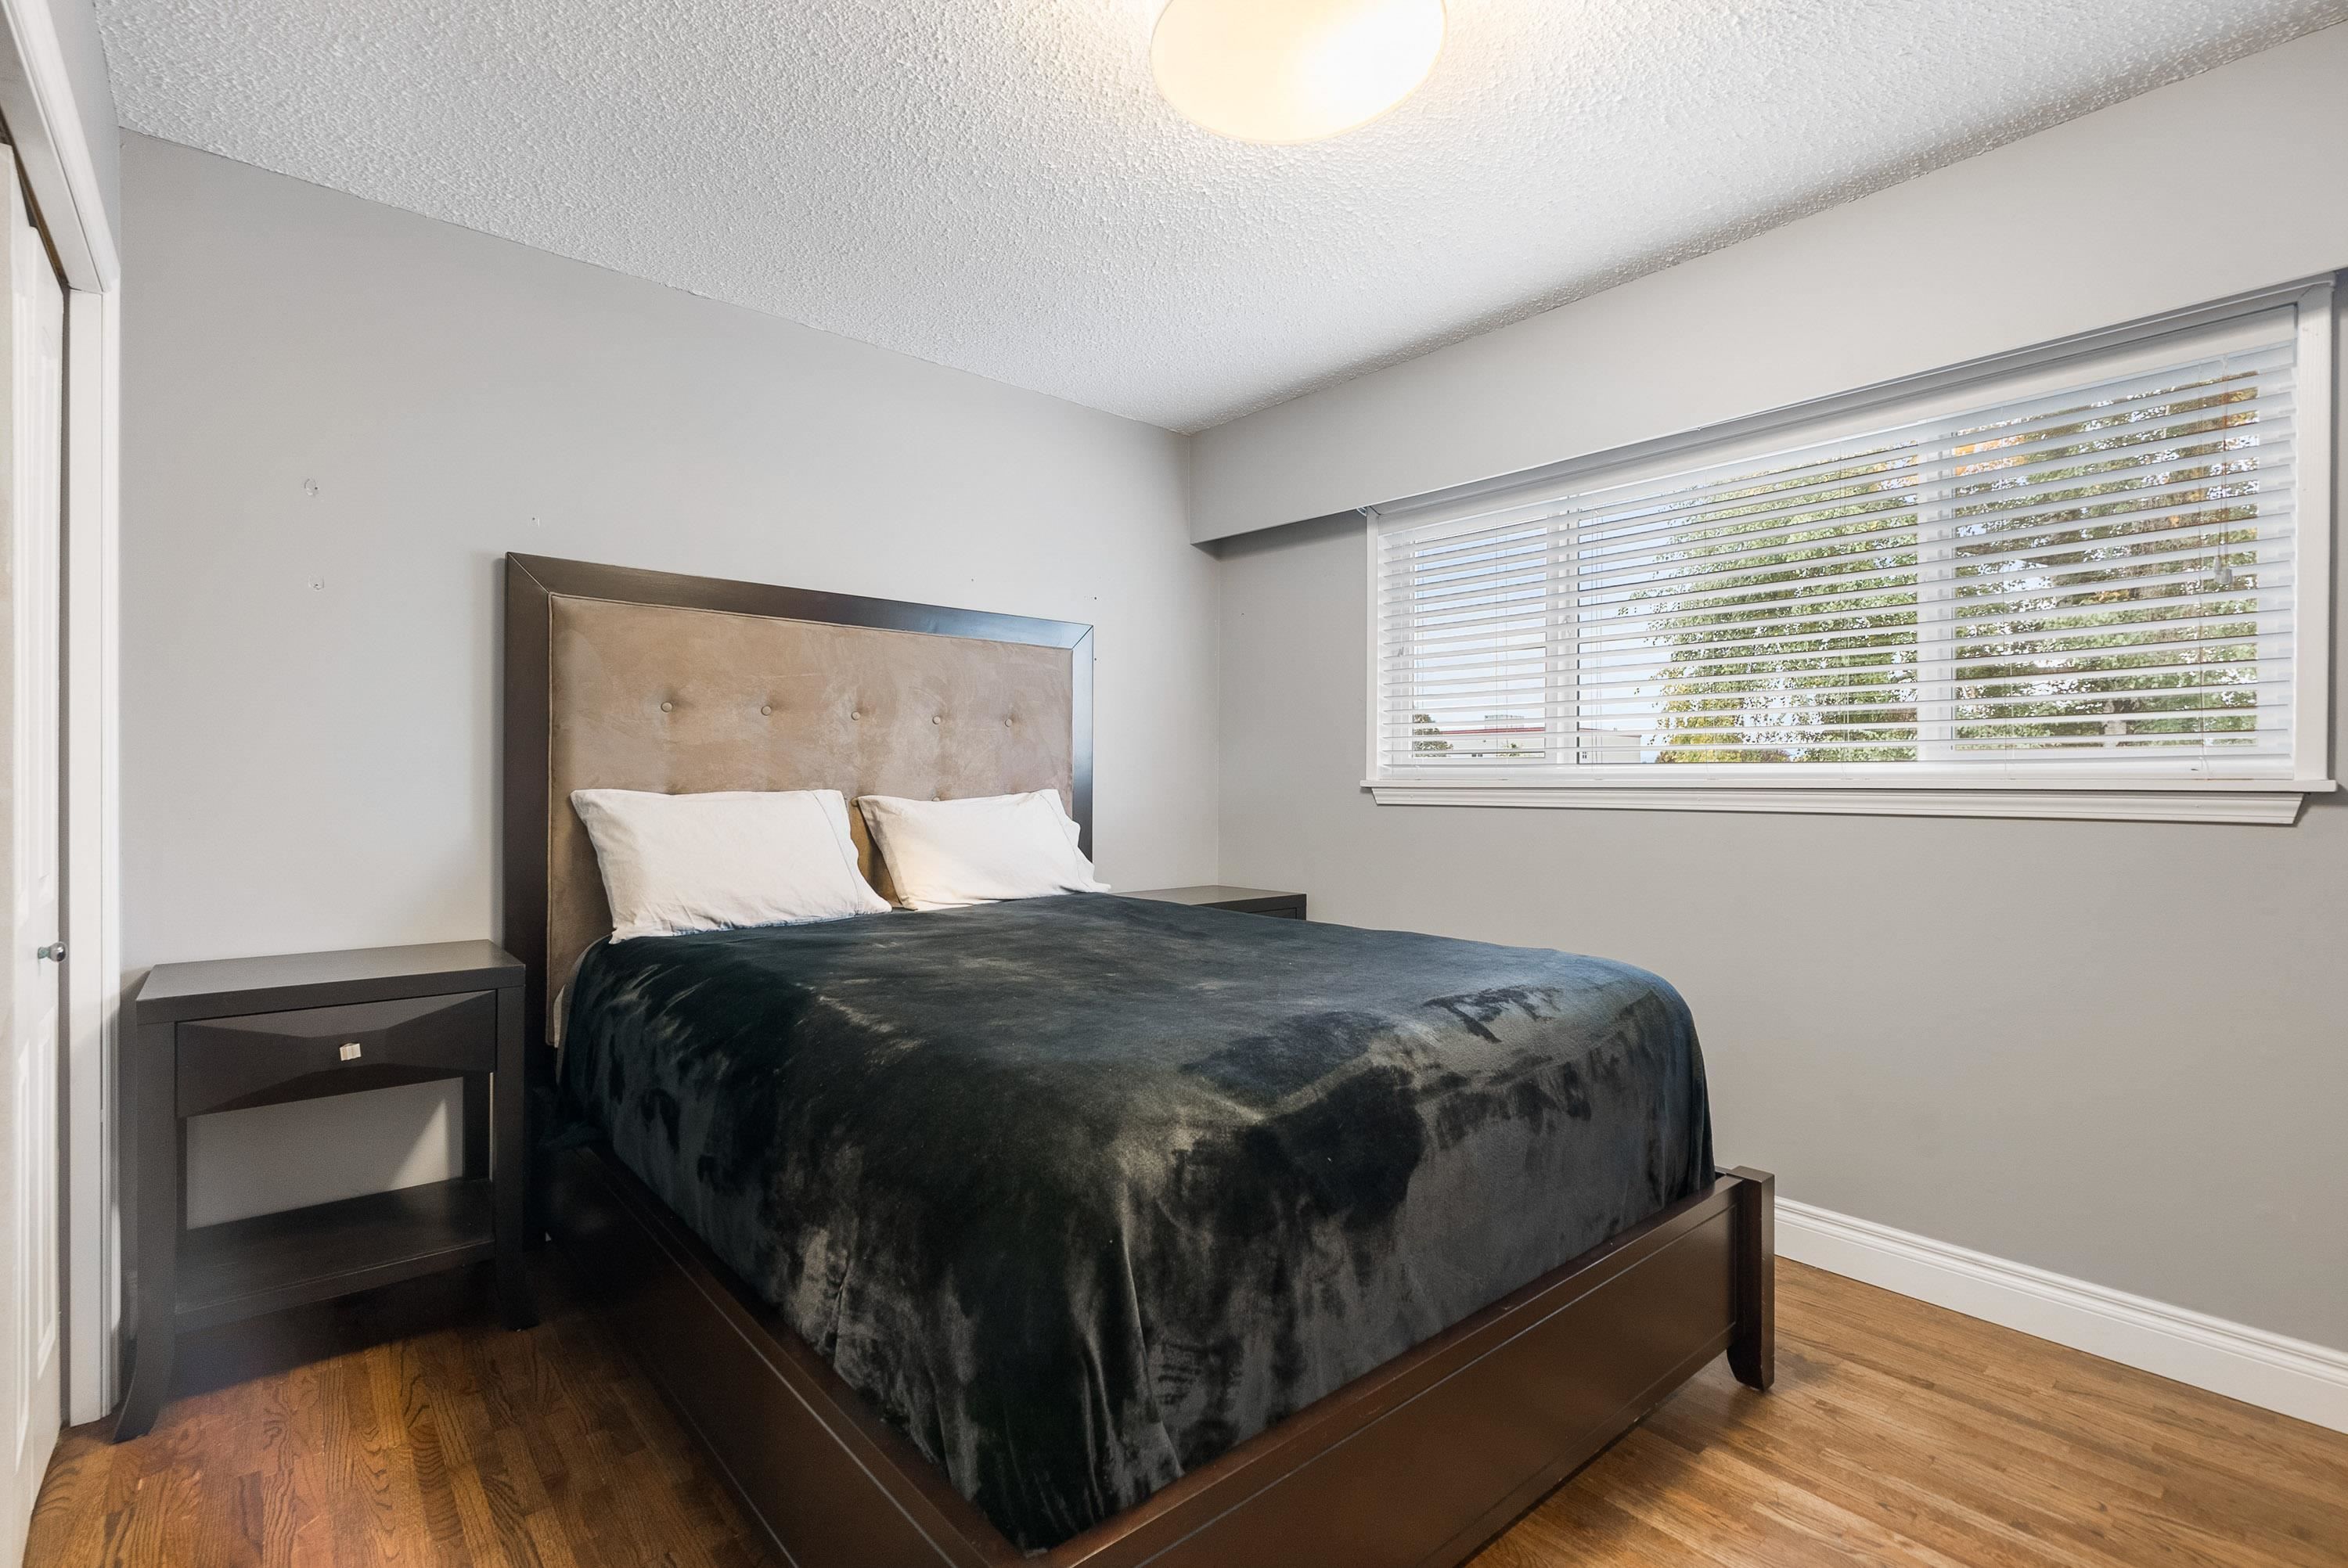 Photo 14: Photos: 8585 NORMAN Crescent in Chilliwack: Chilliwack E Young-Yale House for sale : MLS®# R2627368